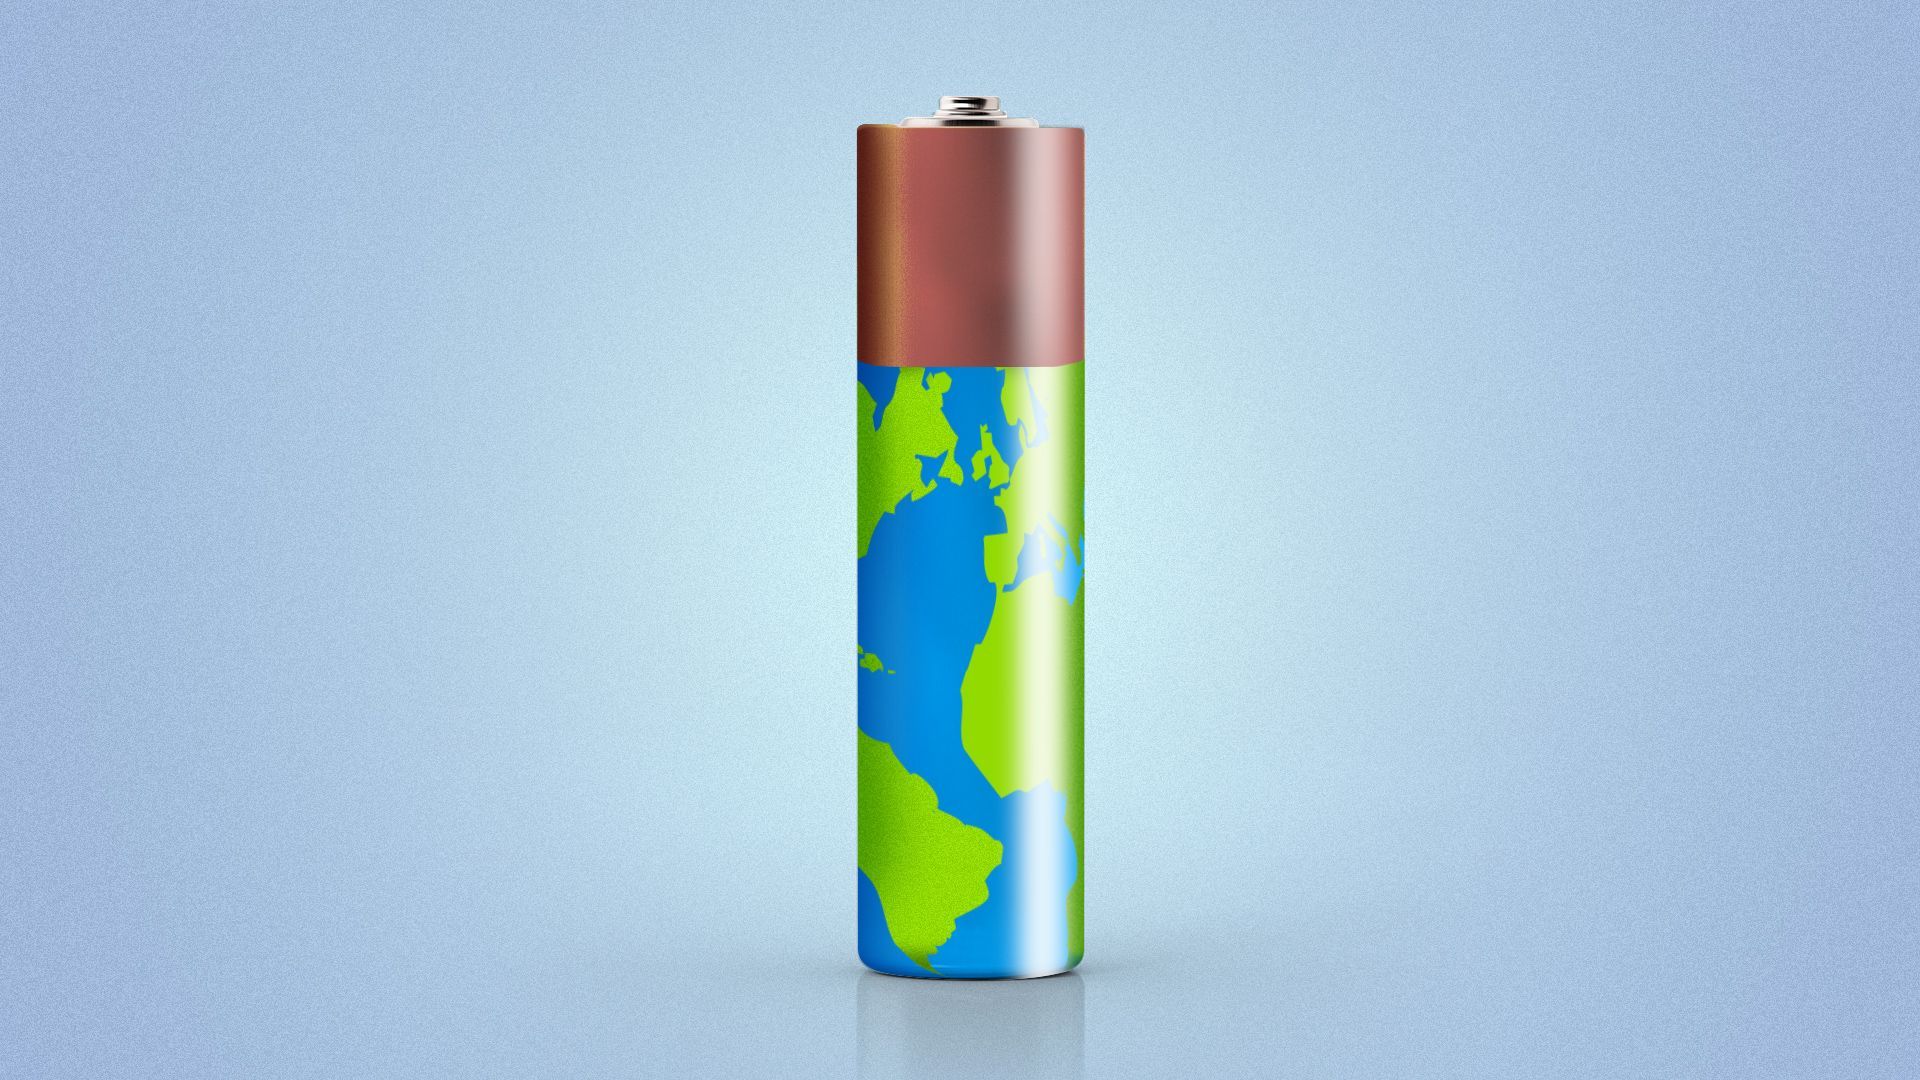 Illustration of the Earth as a battery.